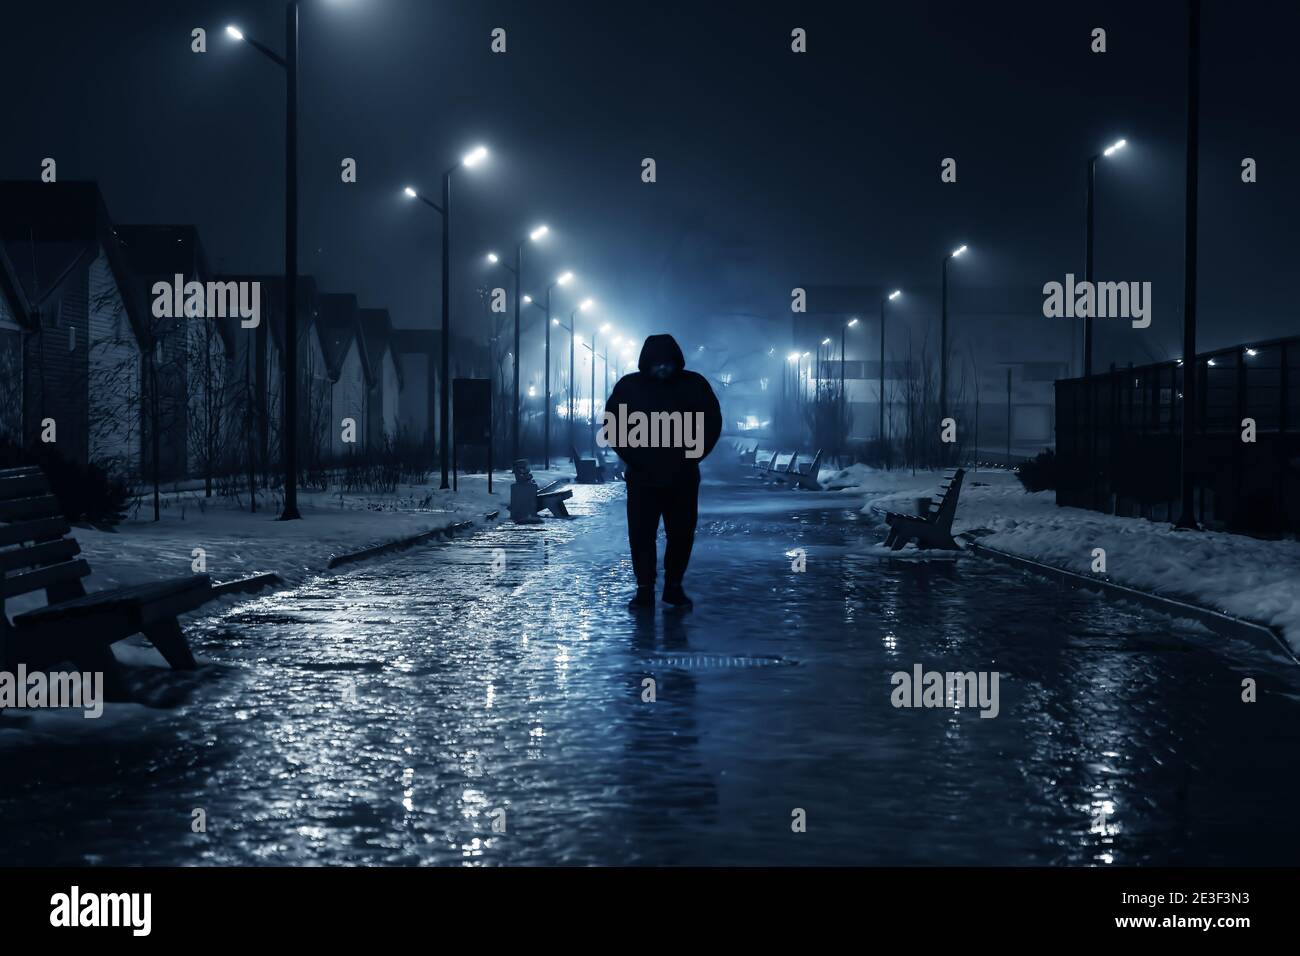 Silhouette of lonely person walks on dark foggy street illuminated with street lamps, blue toned. Stock Photo